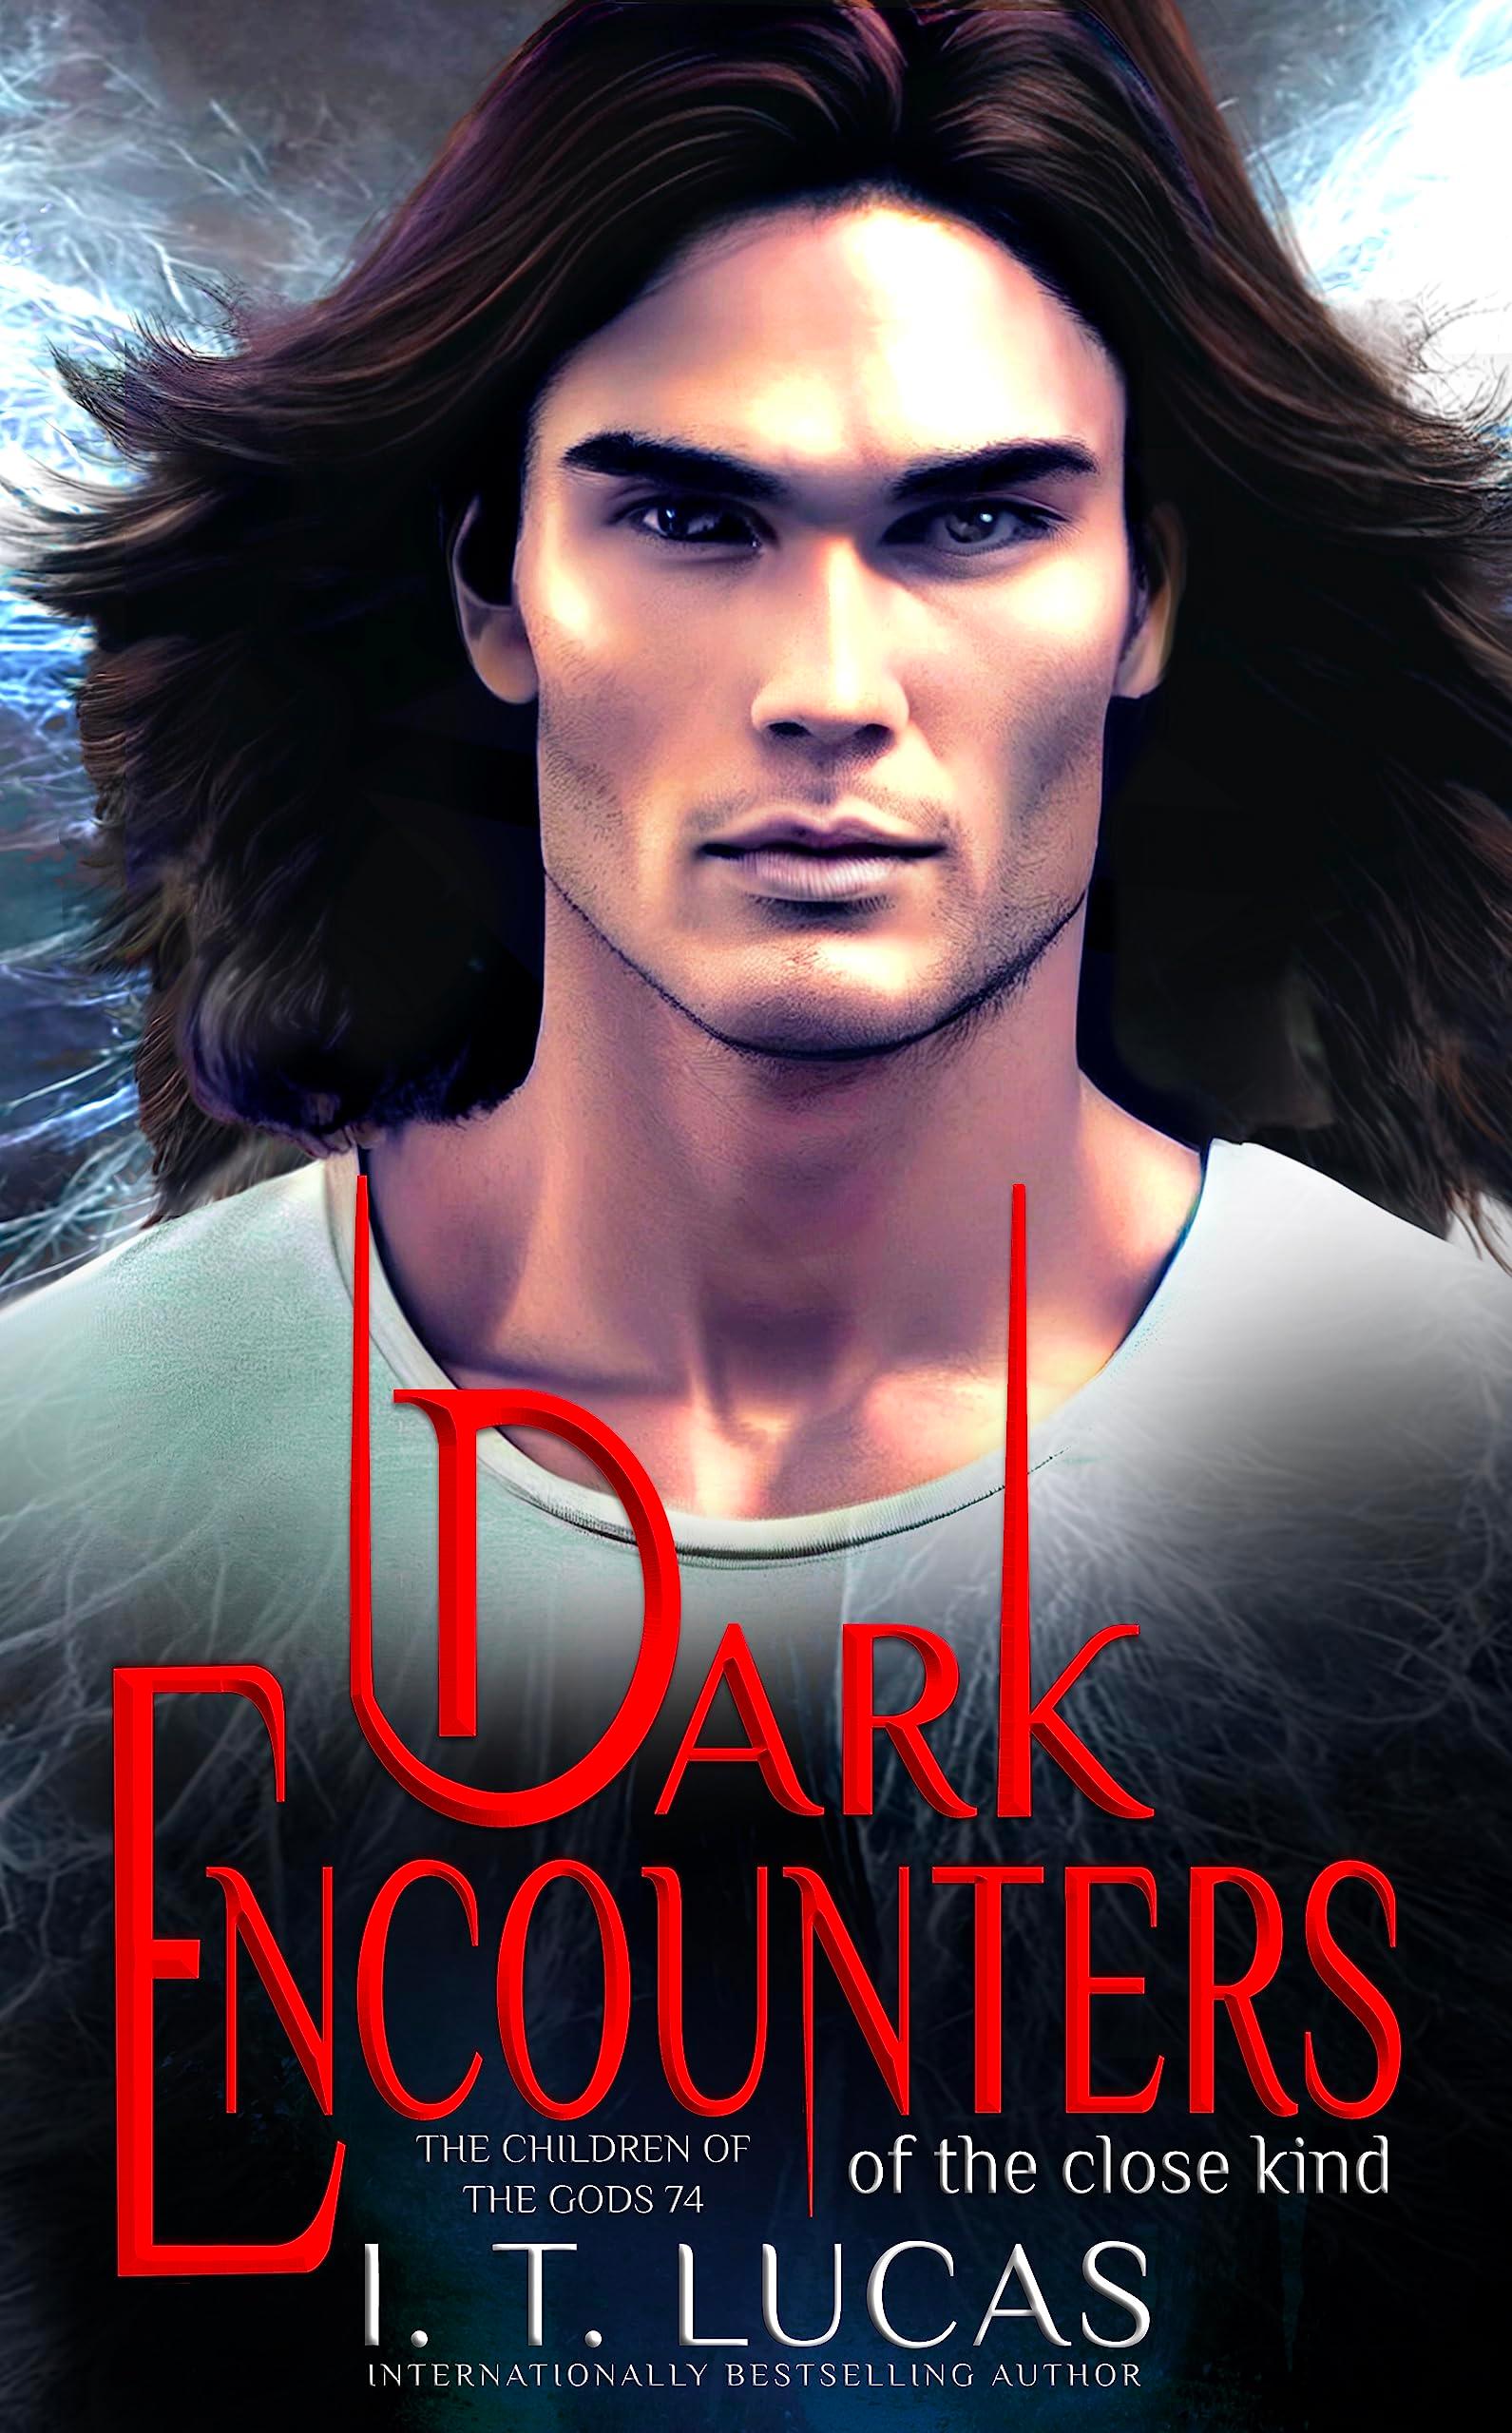 Dark Encounters of the Close Kind